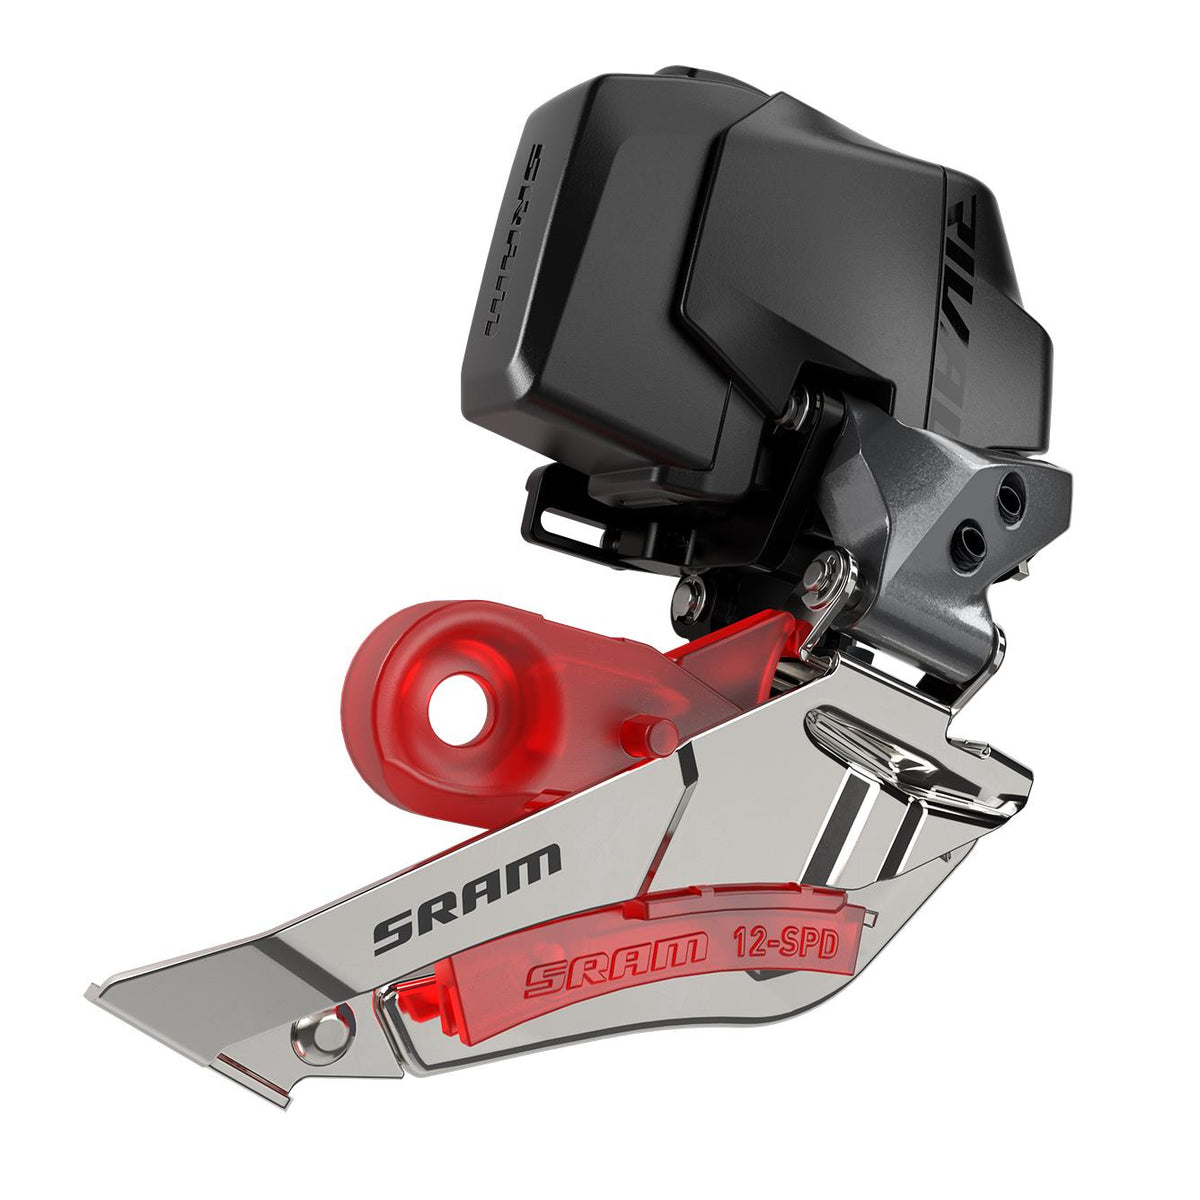 Sram Rival Axs Front Derailleur D1 Braze-On (Battery Not Included)